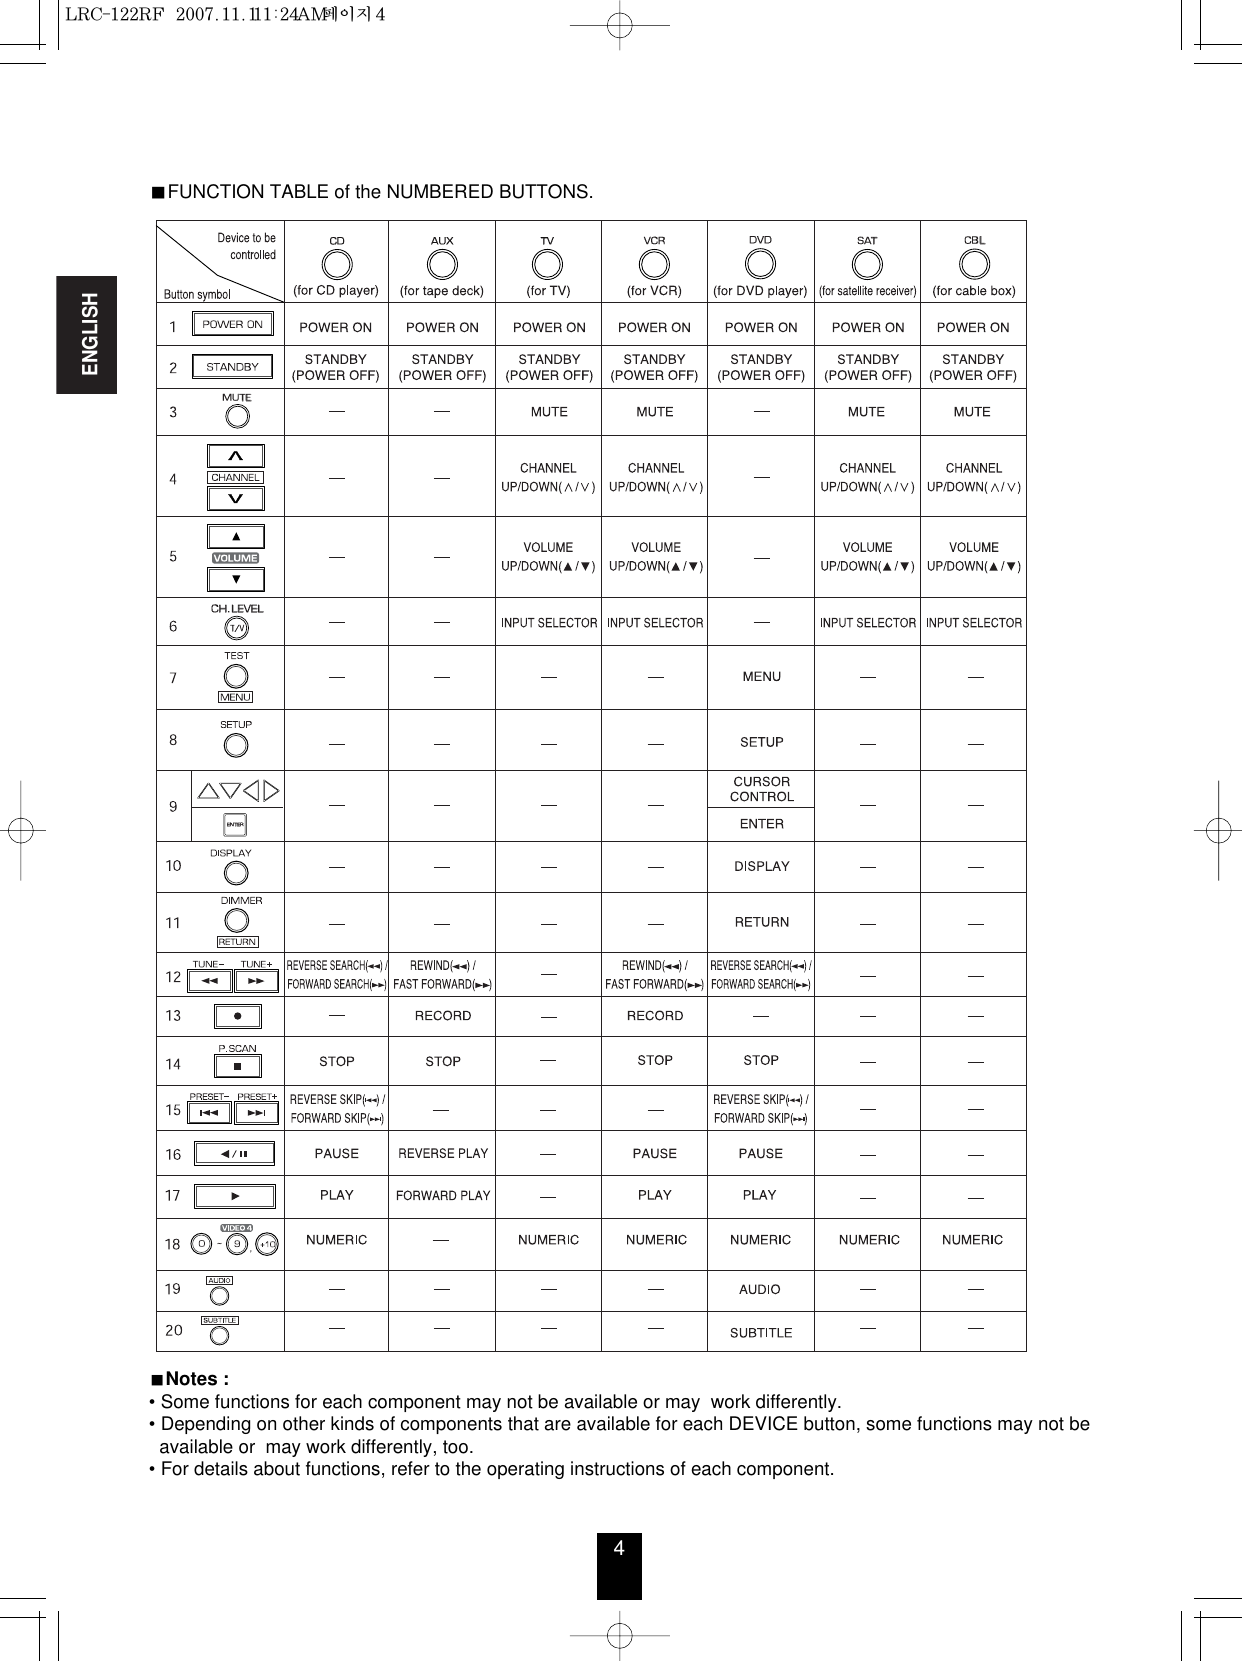 ENGLISH4FUNCTION TABLE of the NUMBERED BUTTONS.Notes :• Some functions for each component may not be available or may  work differently.• Depending on other kinds of components that are available for each DEVICE button, some functions may not be  available or  may work differently, too.• For details about functions, refer to the operating instructions of each component.LRC-122RF�  2007.11.1  11:24 AM  페이지 4